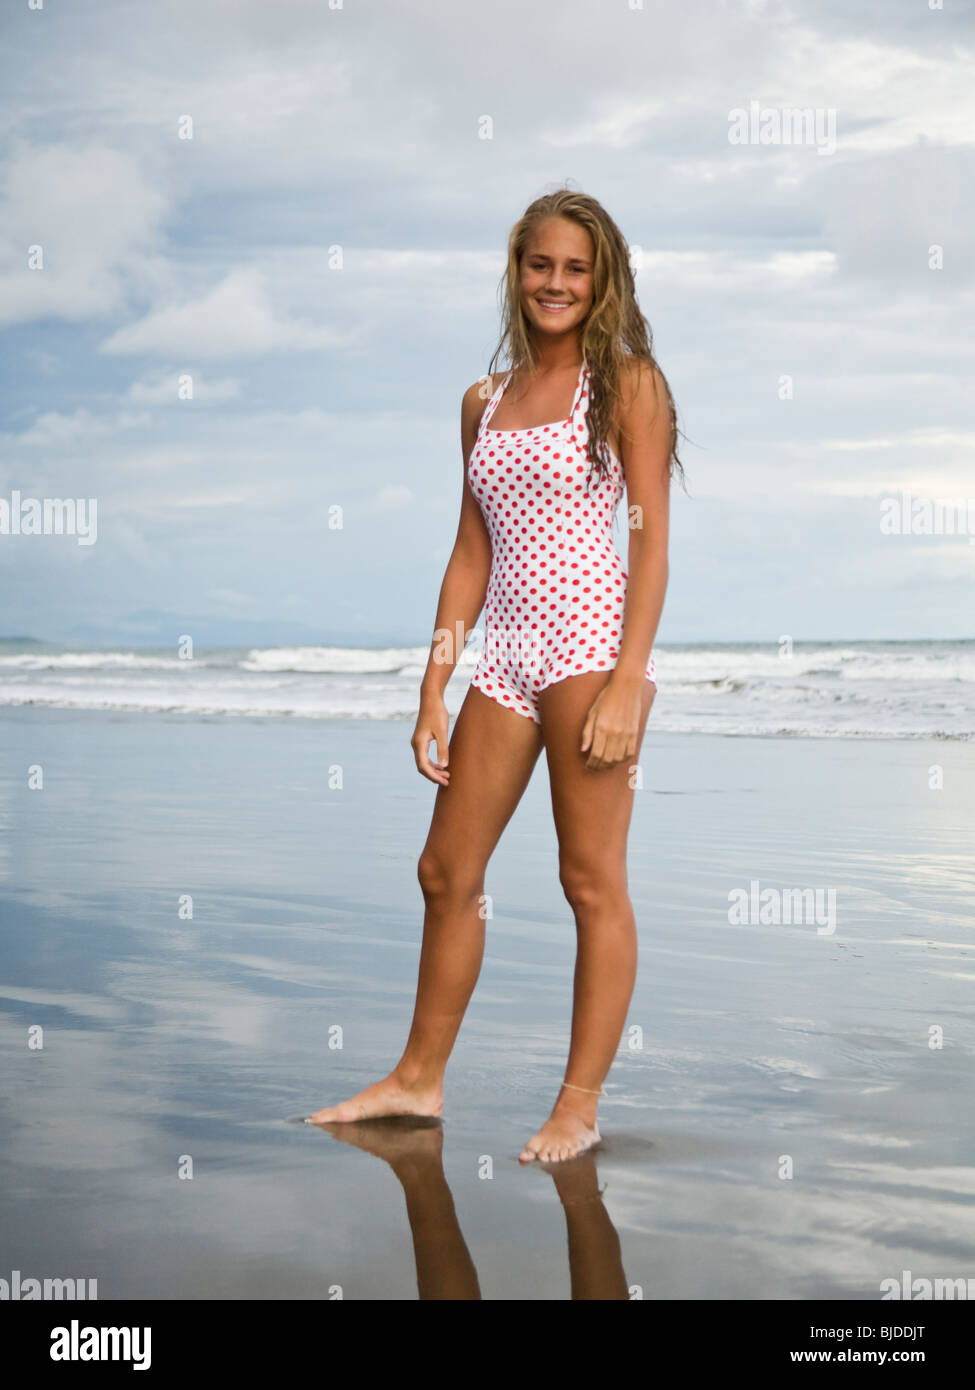 Young woman at the beach Stock Photo - Alamy